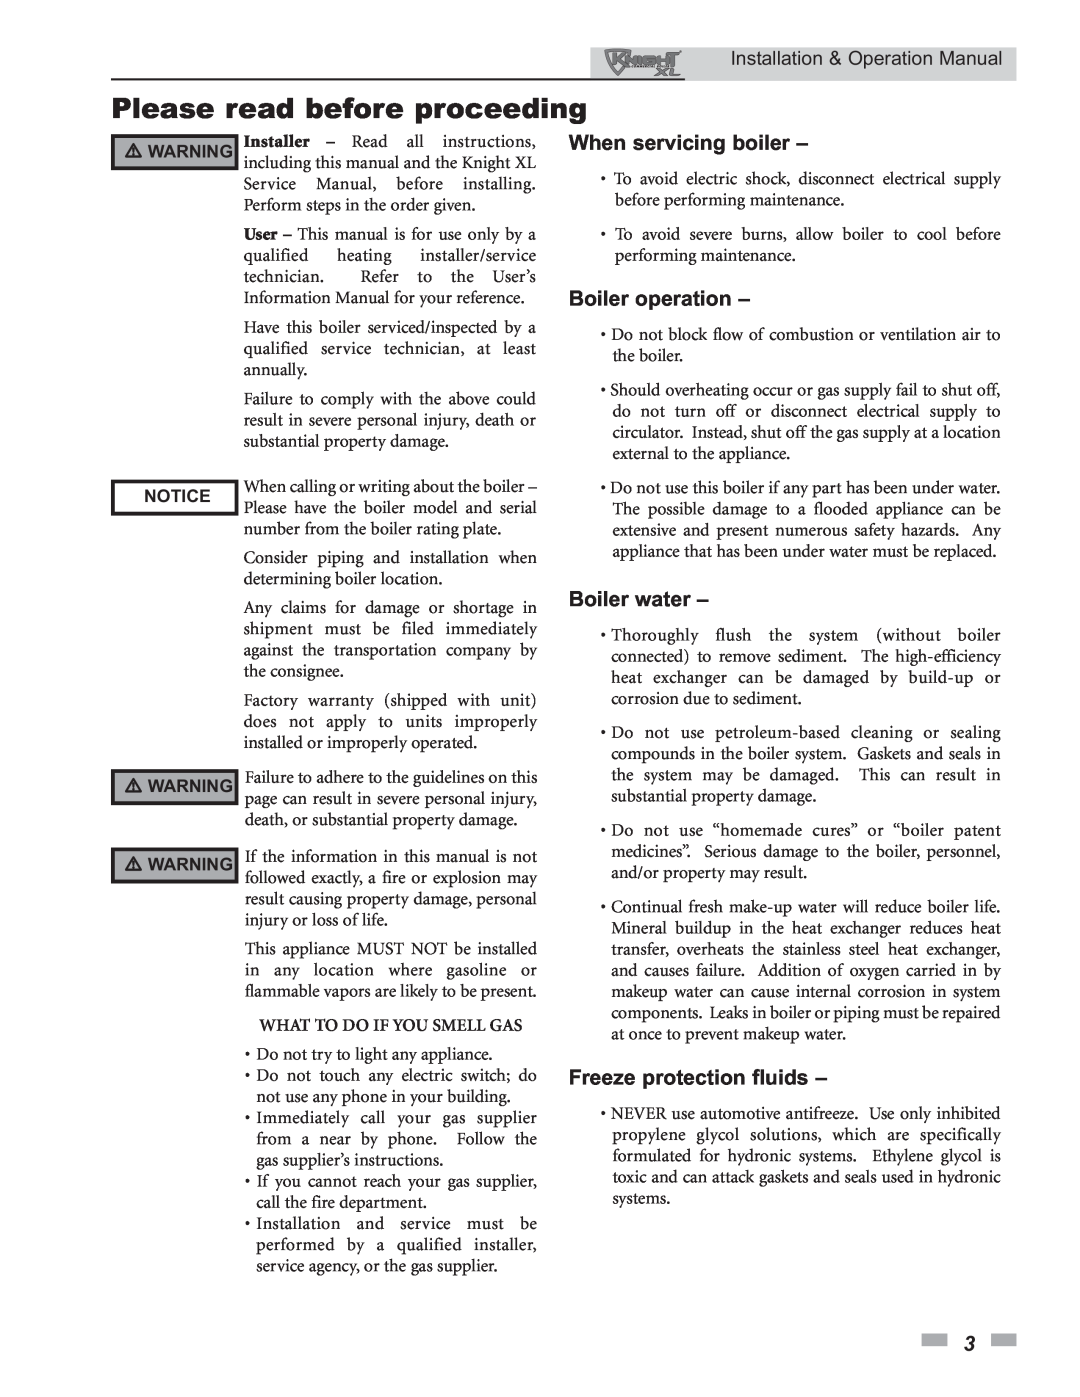 Lochinvar 399 operation manual Please read before proceeding, When servicing boiler, Boiler operation, Boiler water 